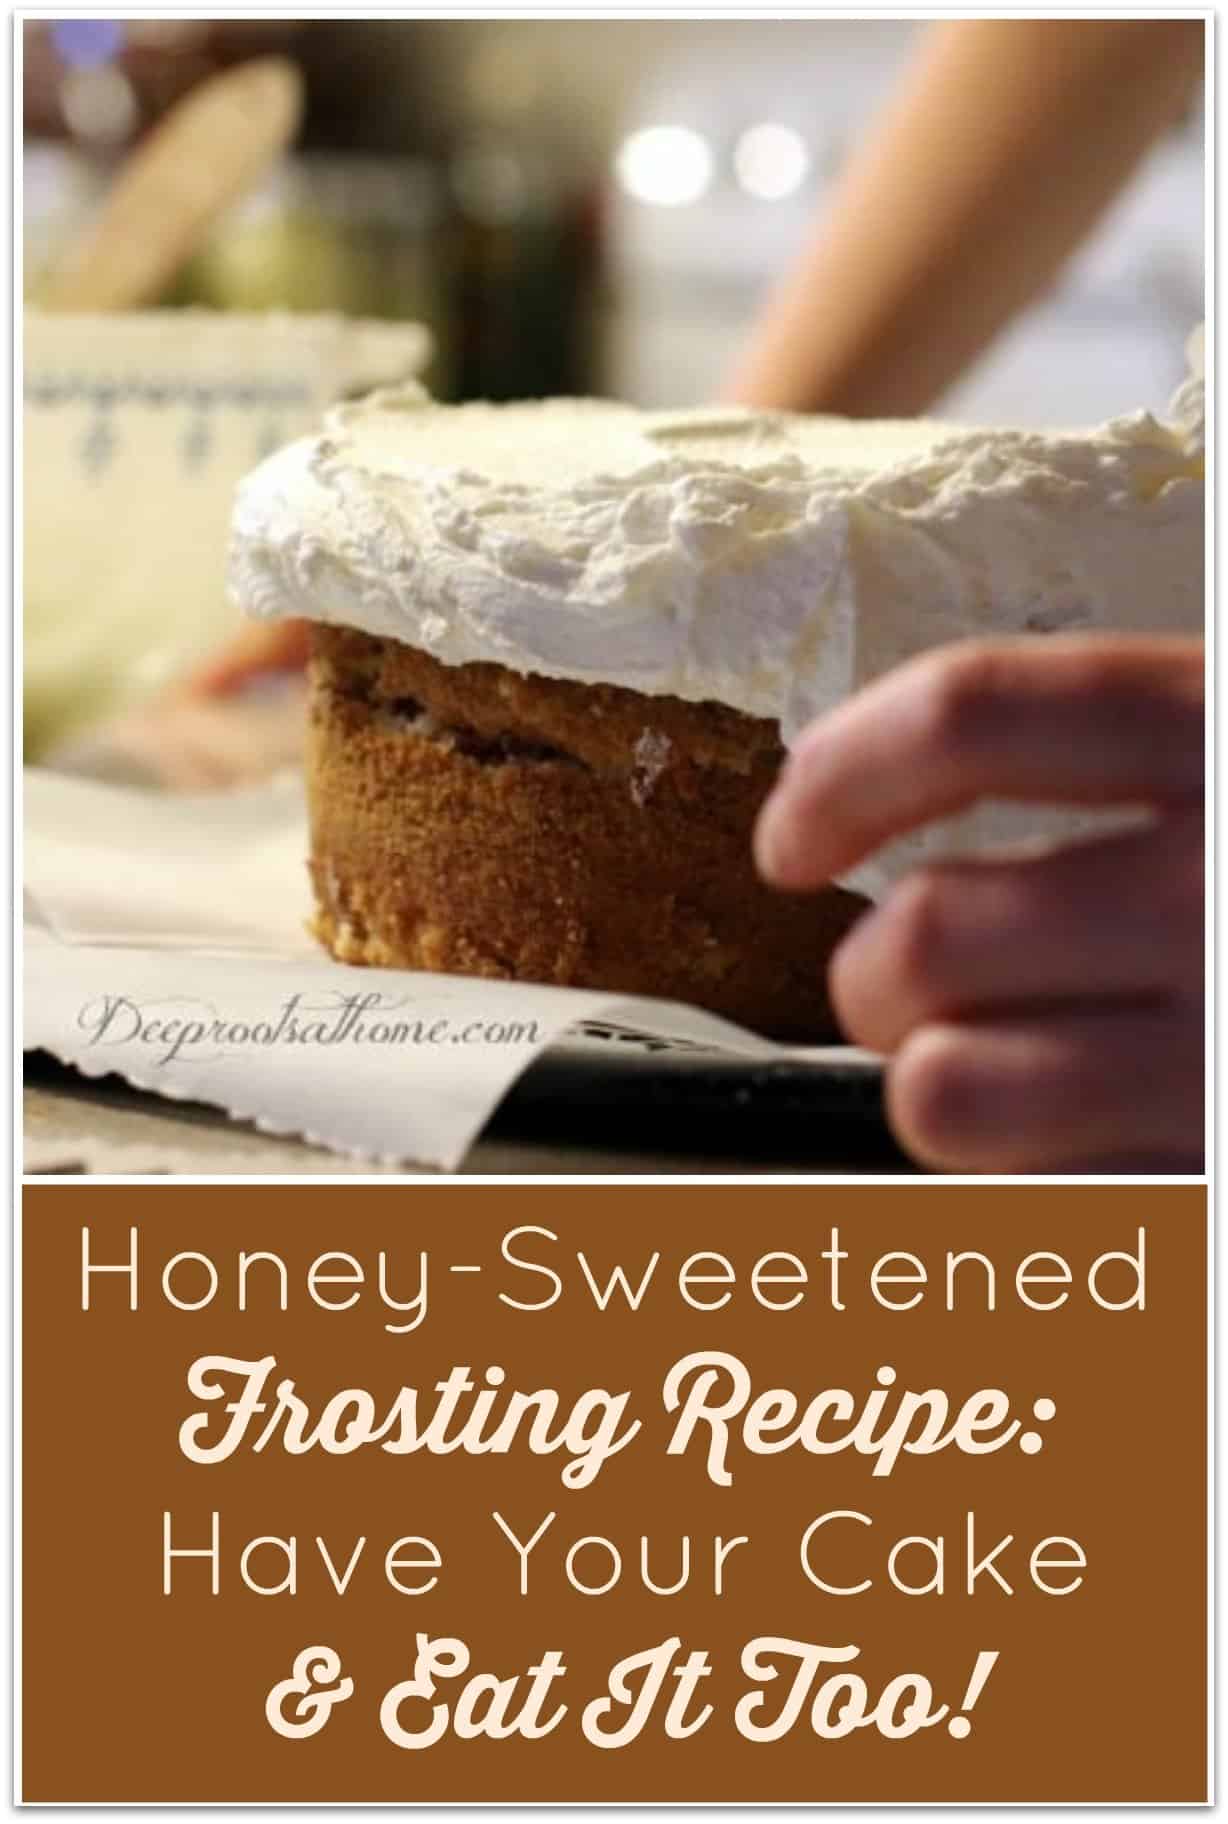 Honey-Sweetened Frosting (Have Your Cake & Eat It Too). Frosting a cake 